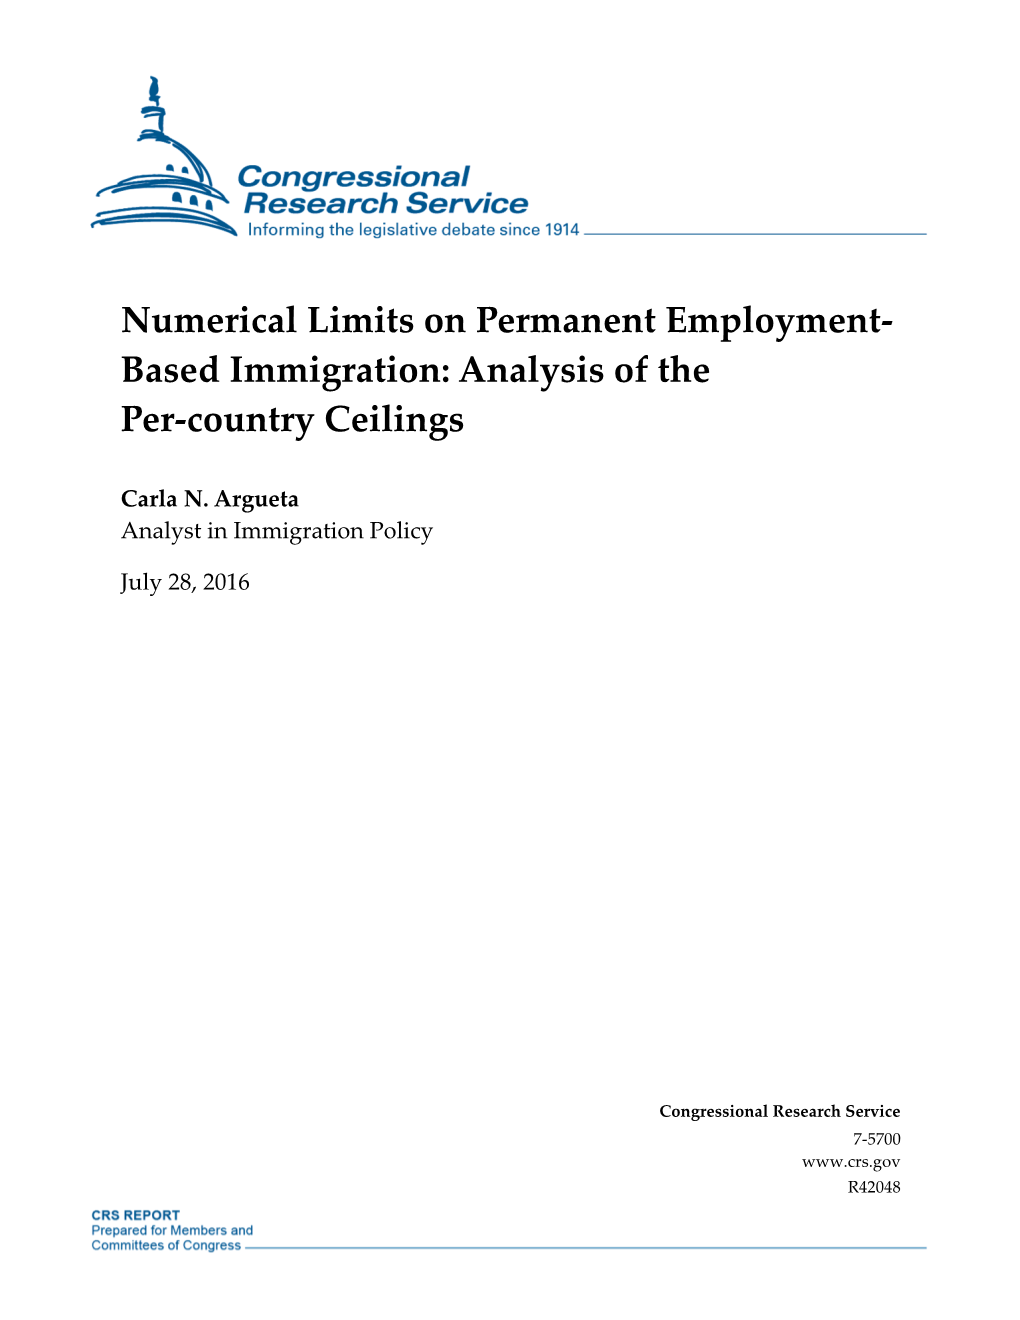 Per-Country Limits on Permanent Employment-Based Immigration